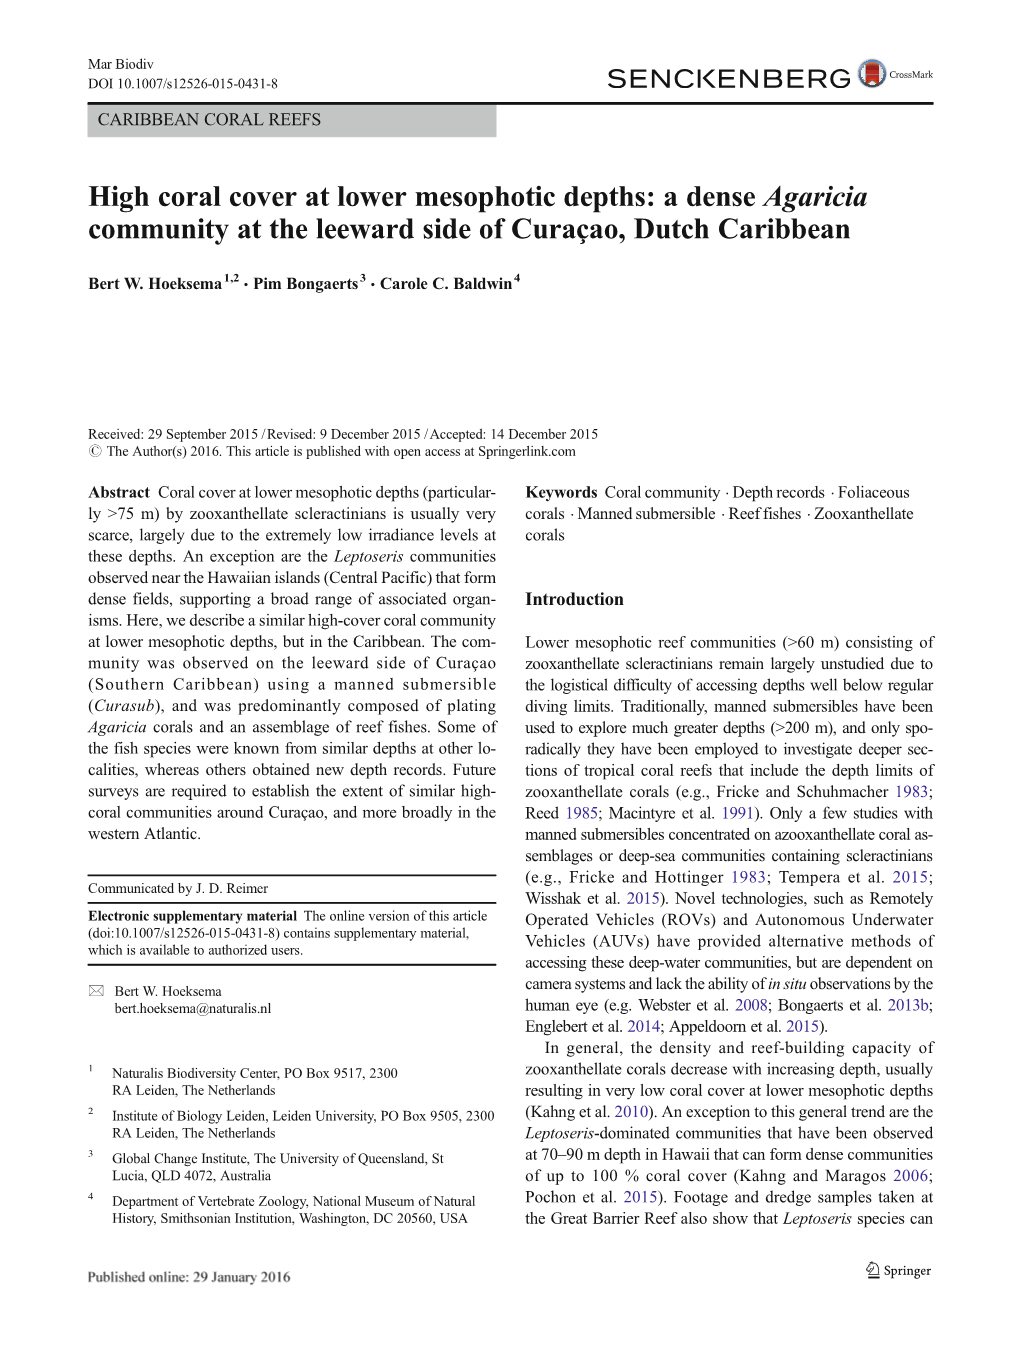 High Coral Cover at Lower Mesophotic Depths: a Dense Agaricia Community at the Leeward Side of Curaçao, Dutch Caribbean